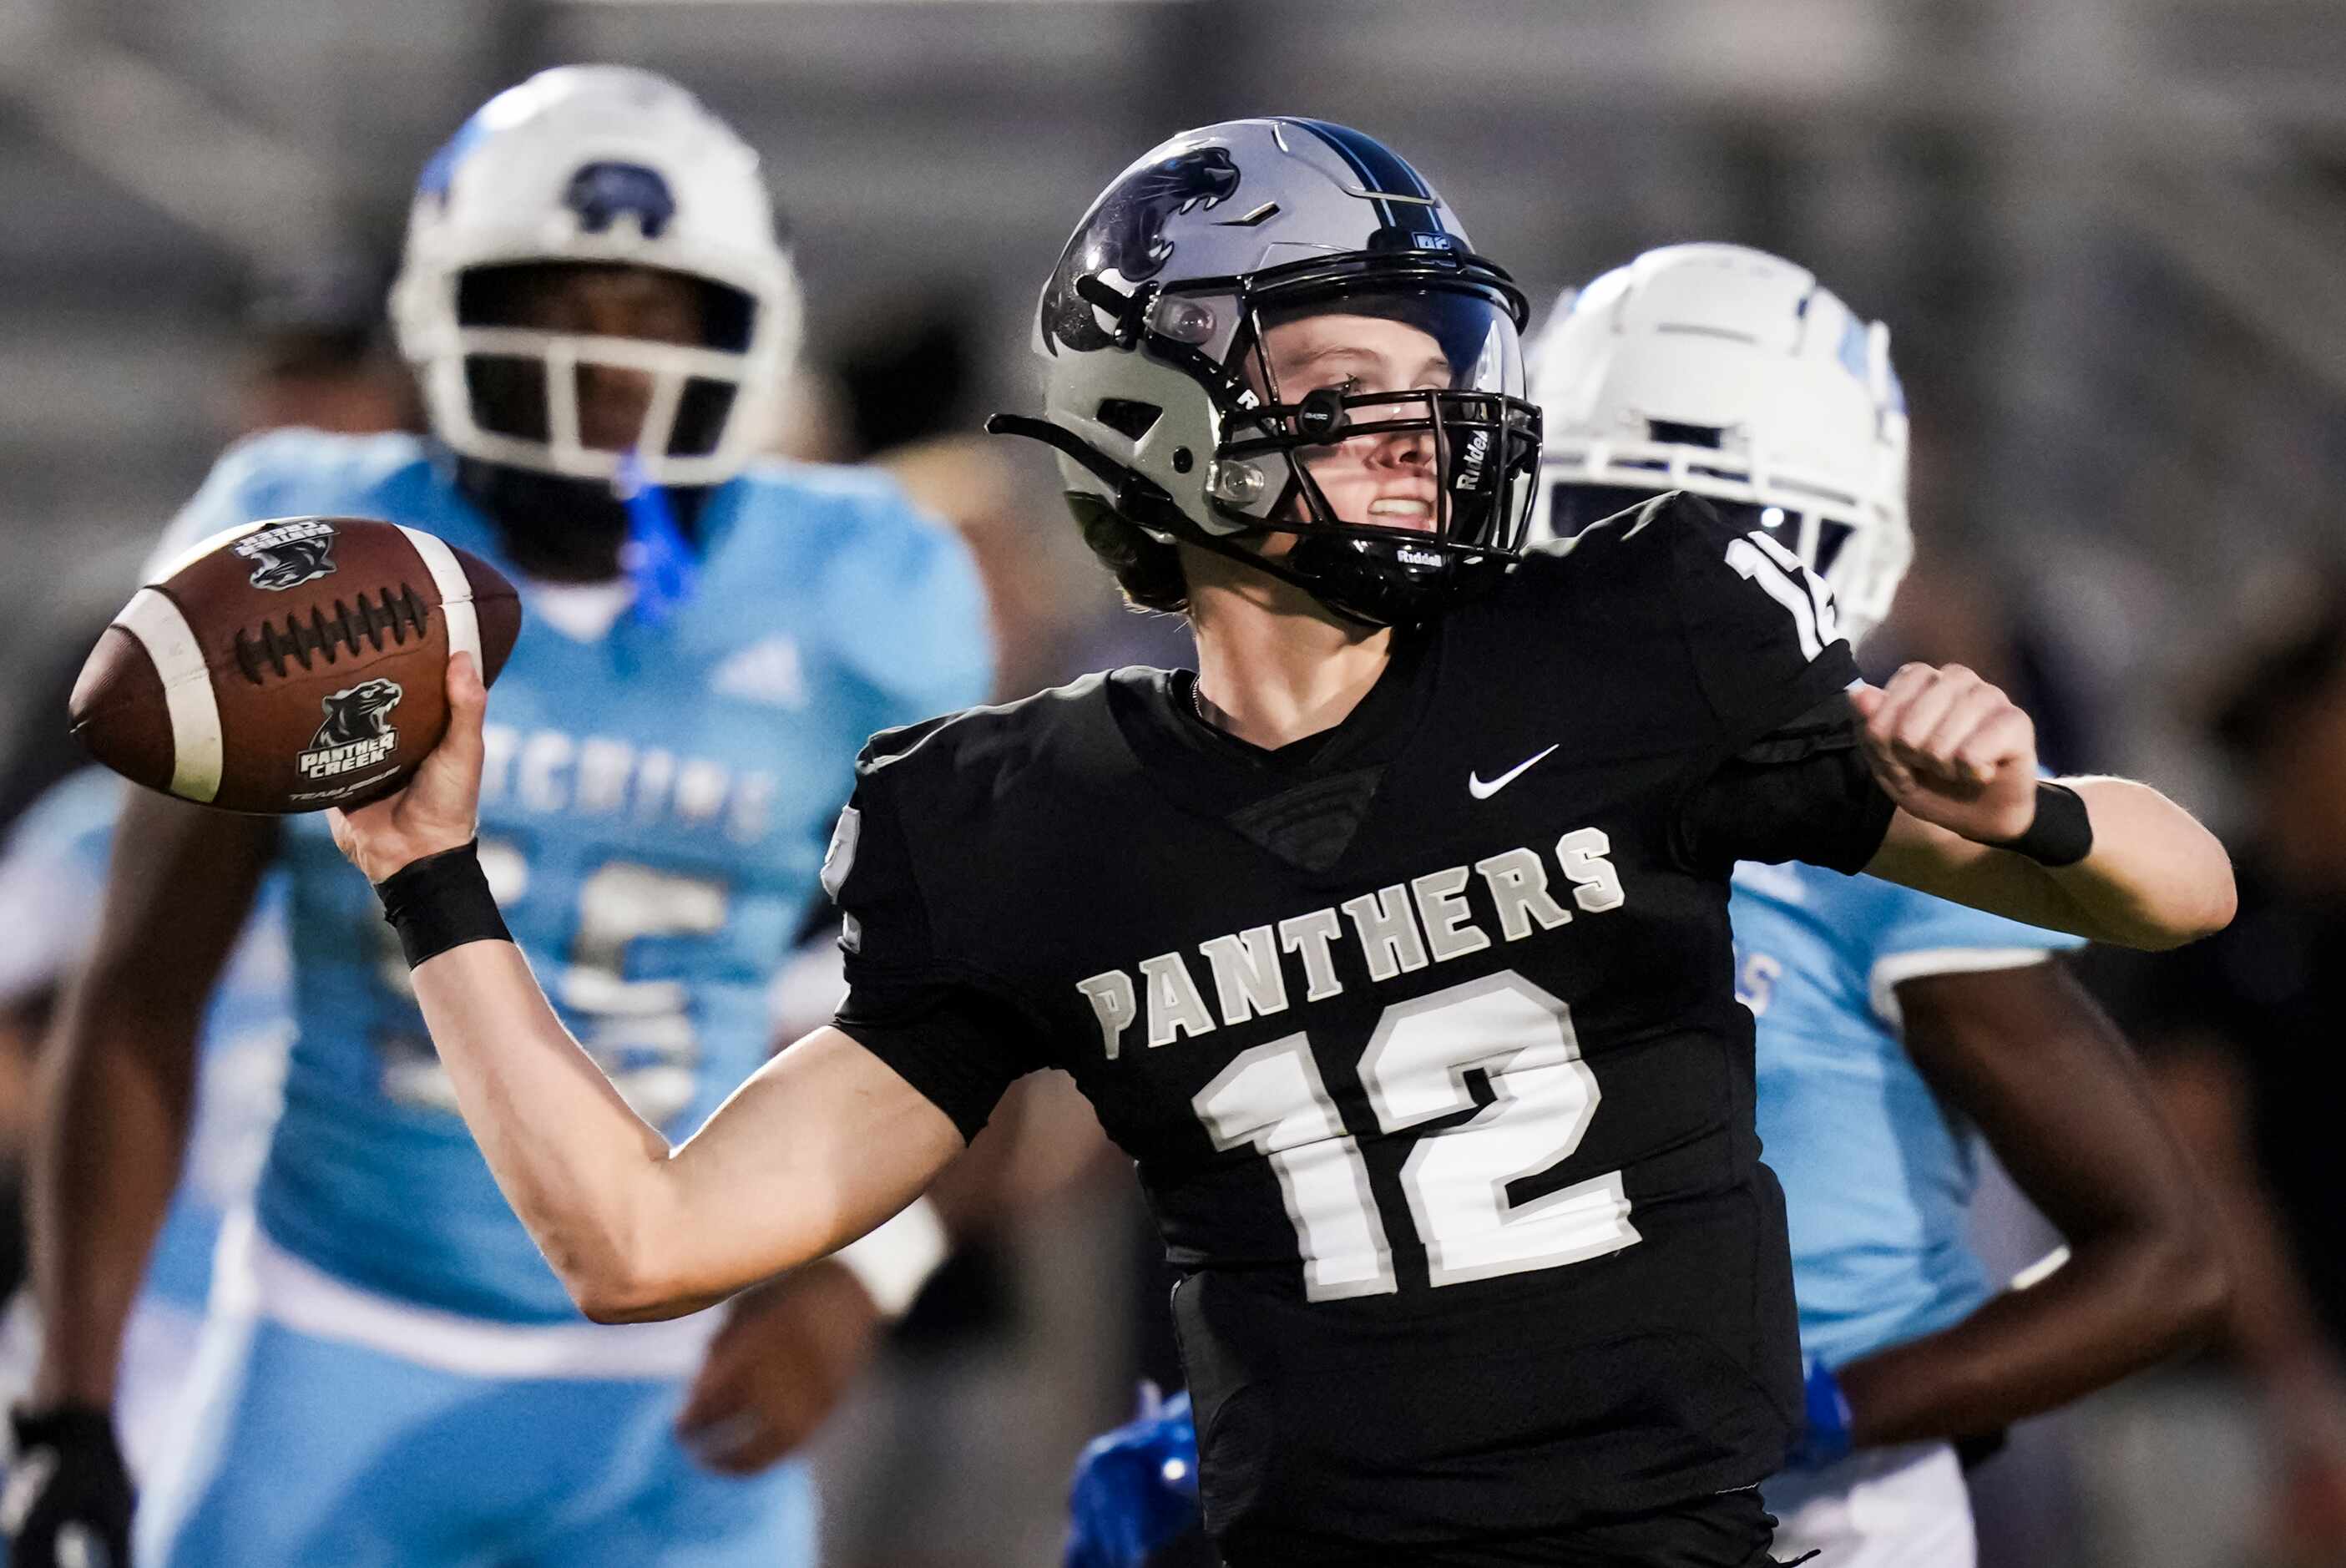 Panther Creek quarterback Braxton Roberts (12) throws a pass during the first half of a...